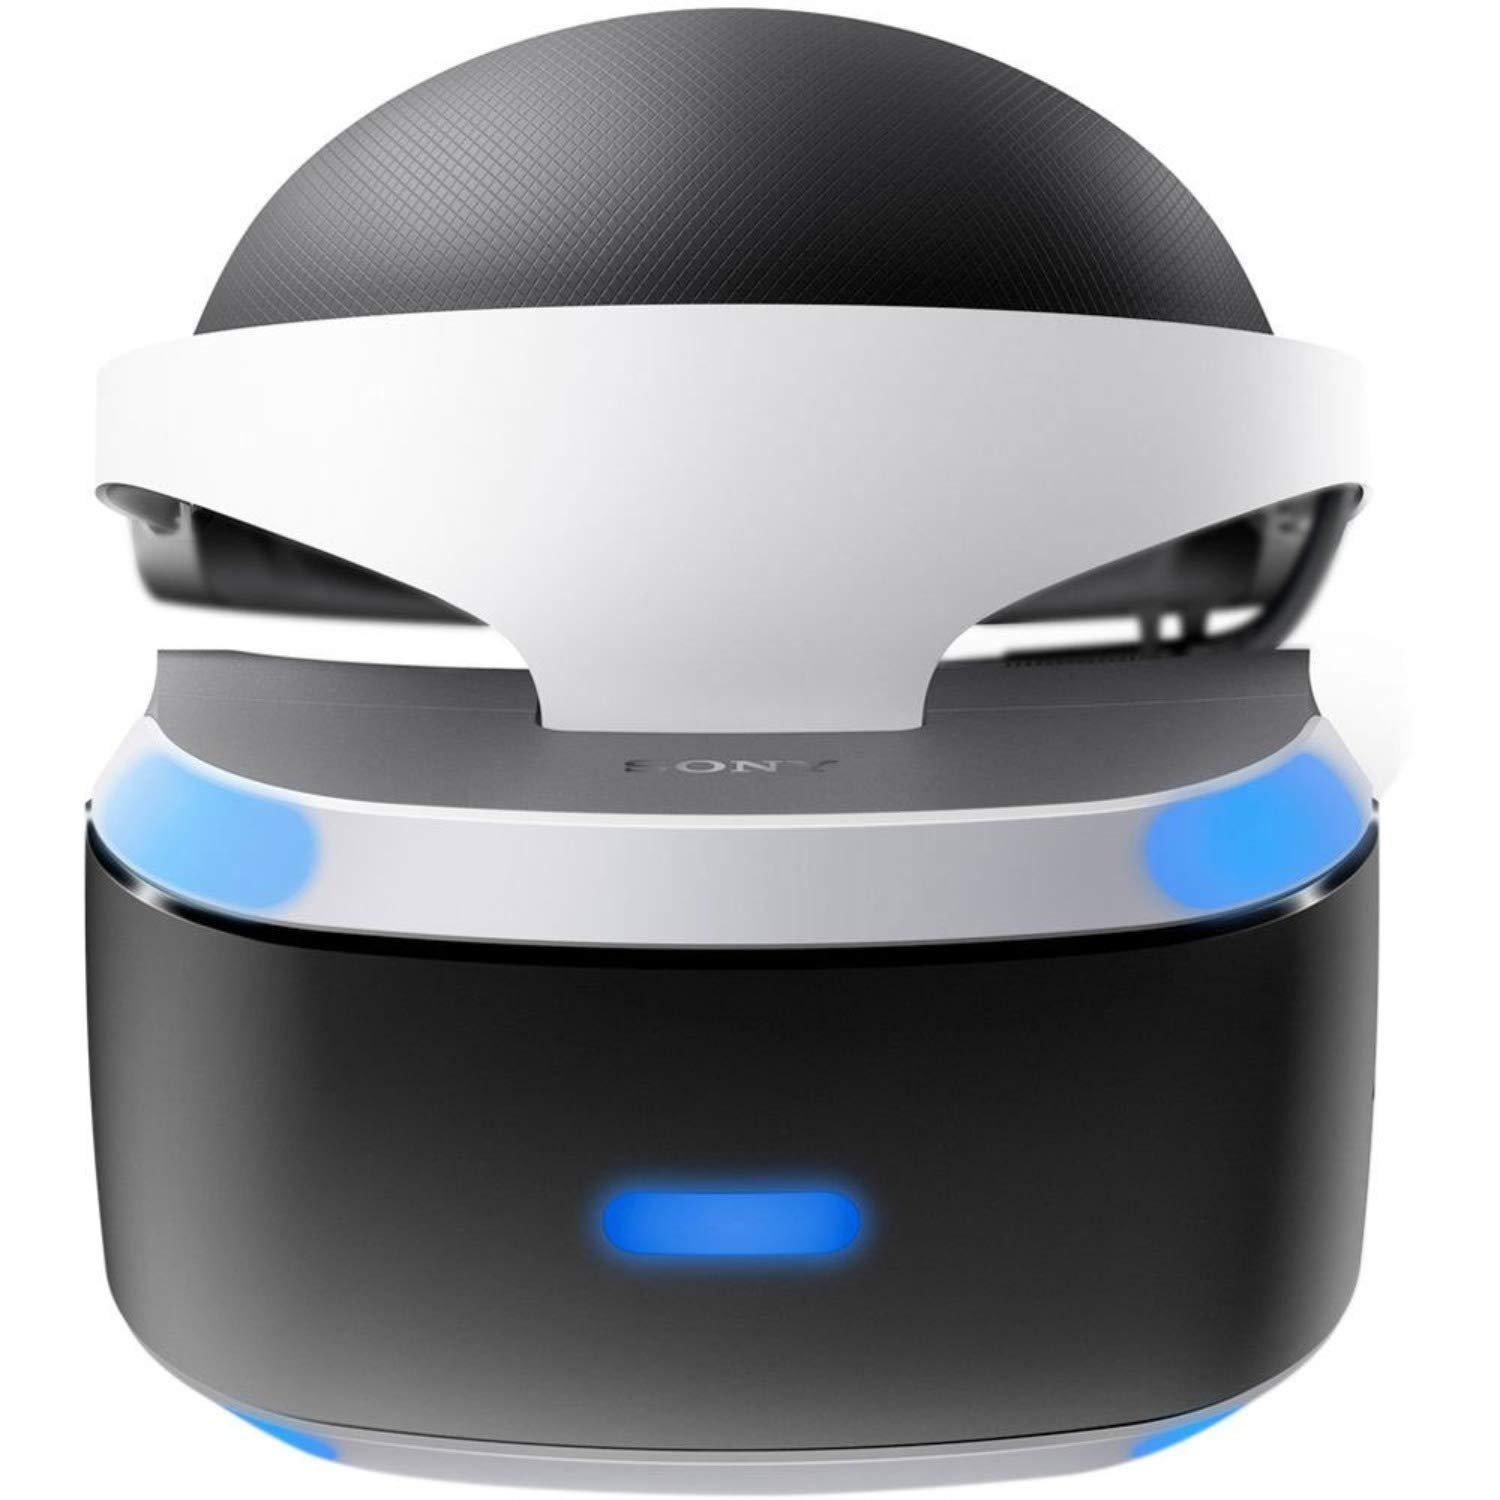 Sony PlayStation VR Headset for PS4 GameStop Premium Refurbished